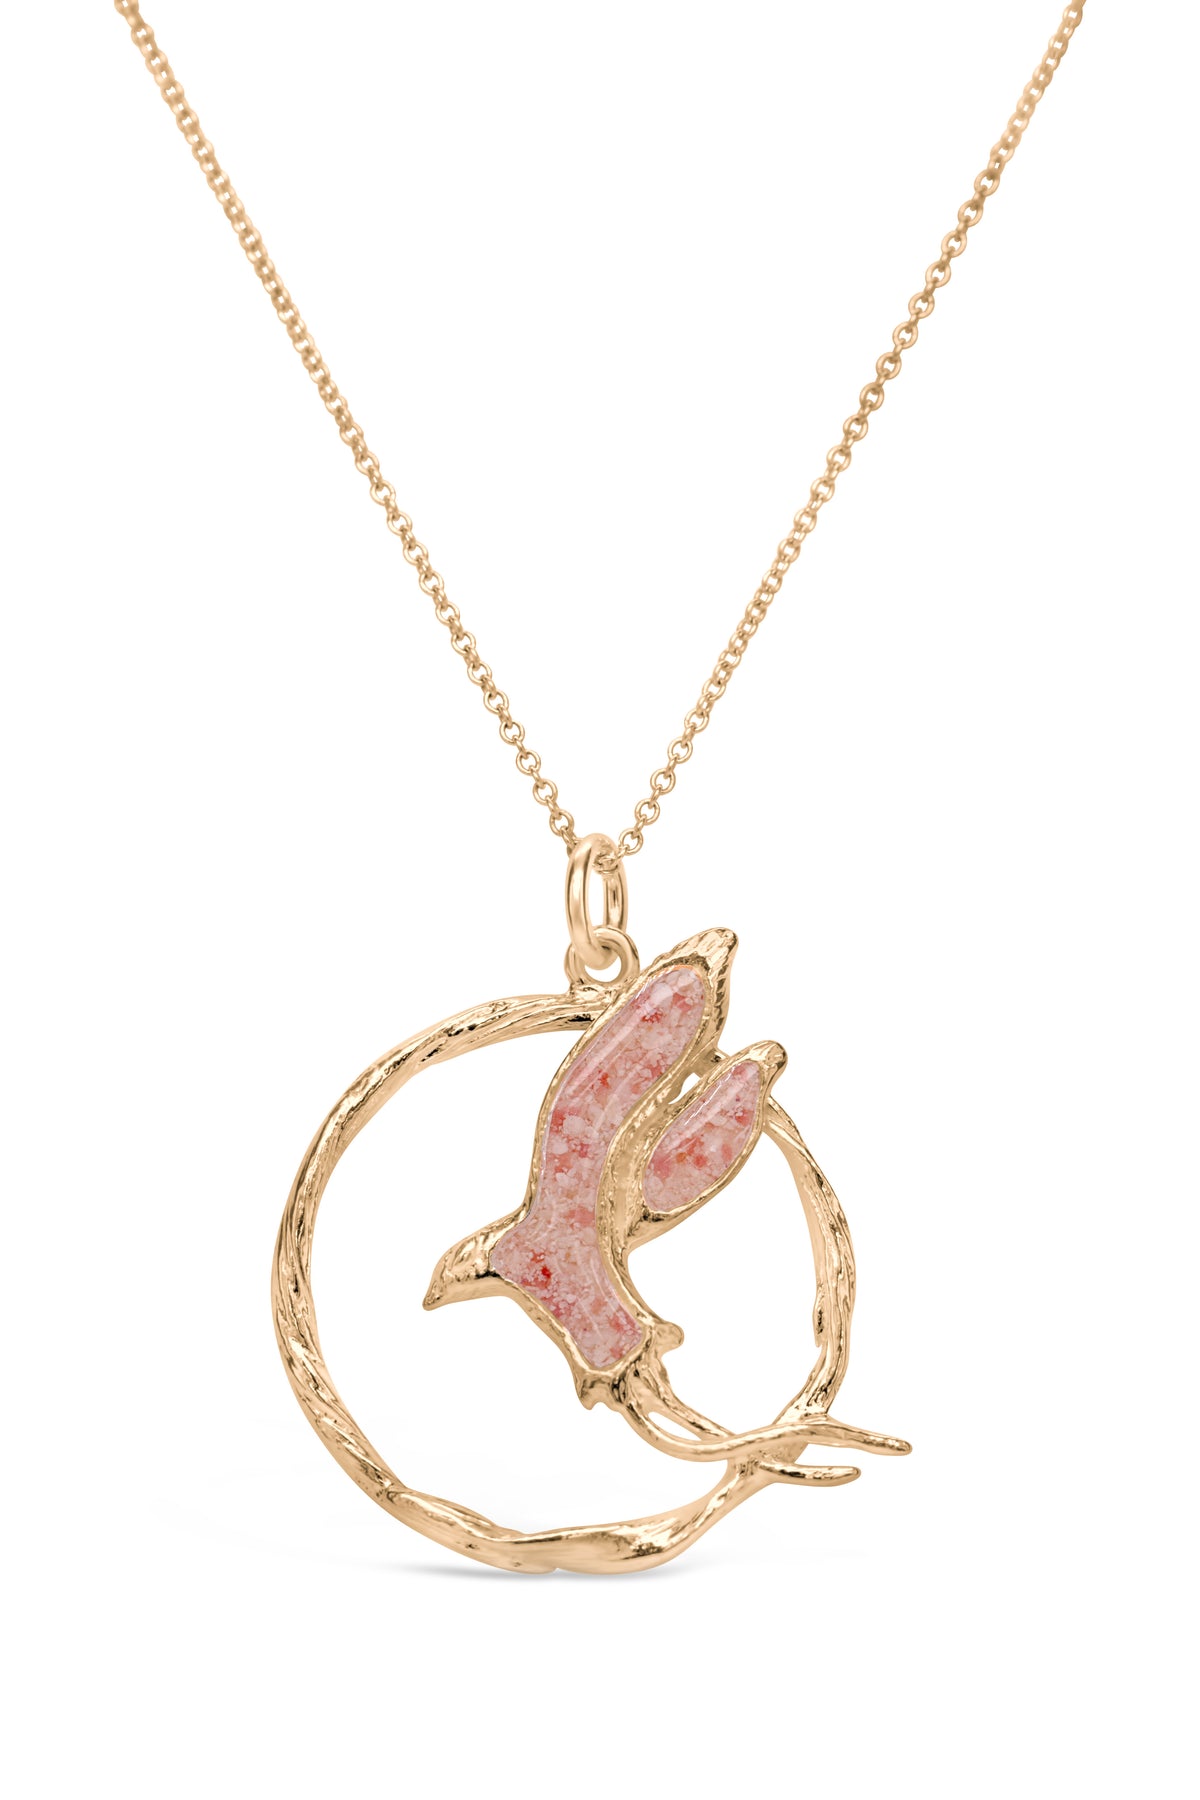 Longtail ~ The Longtail  in Flight Pendant in Gold